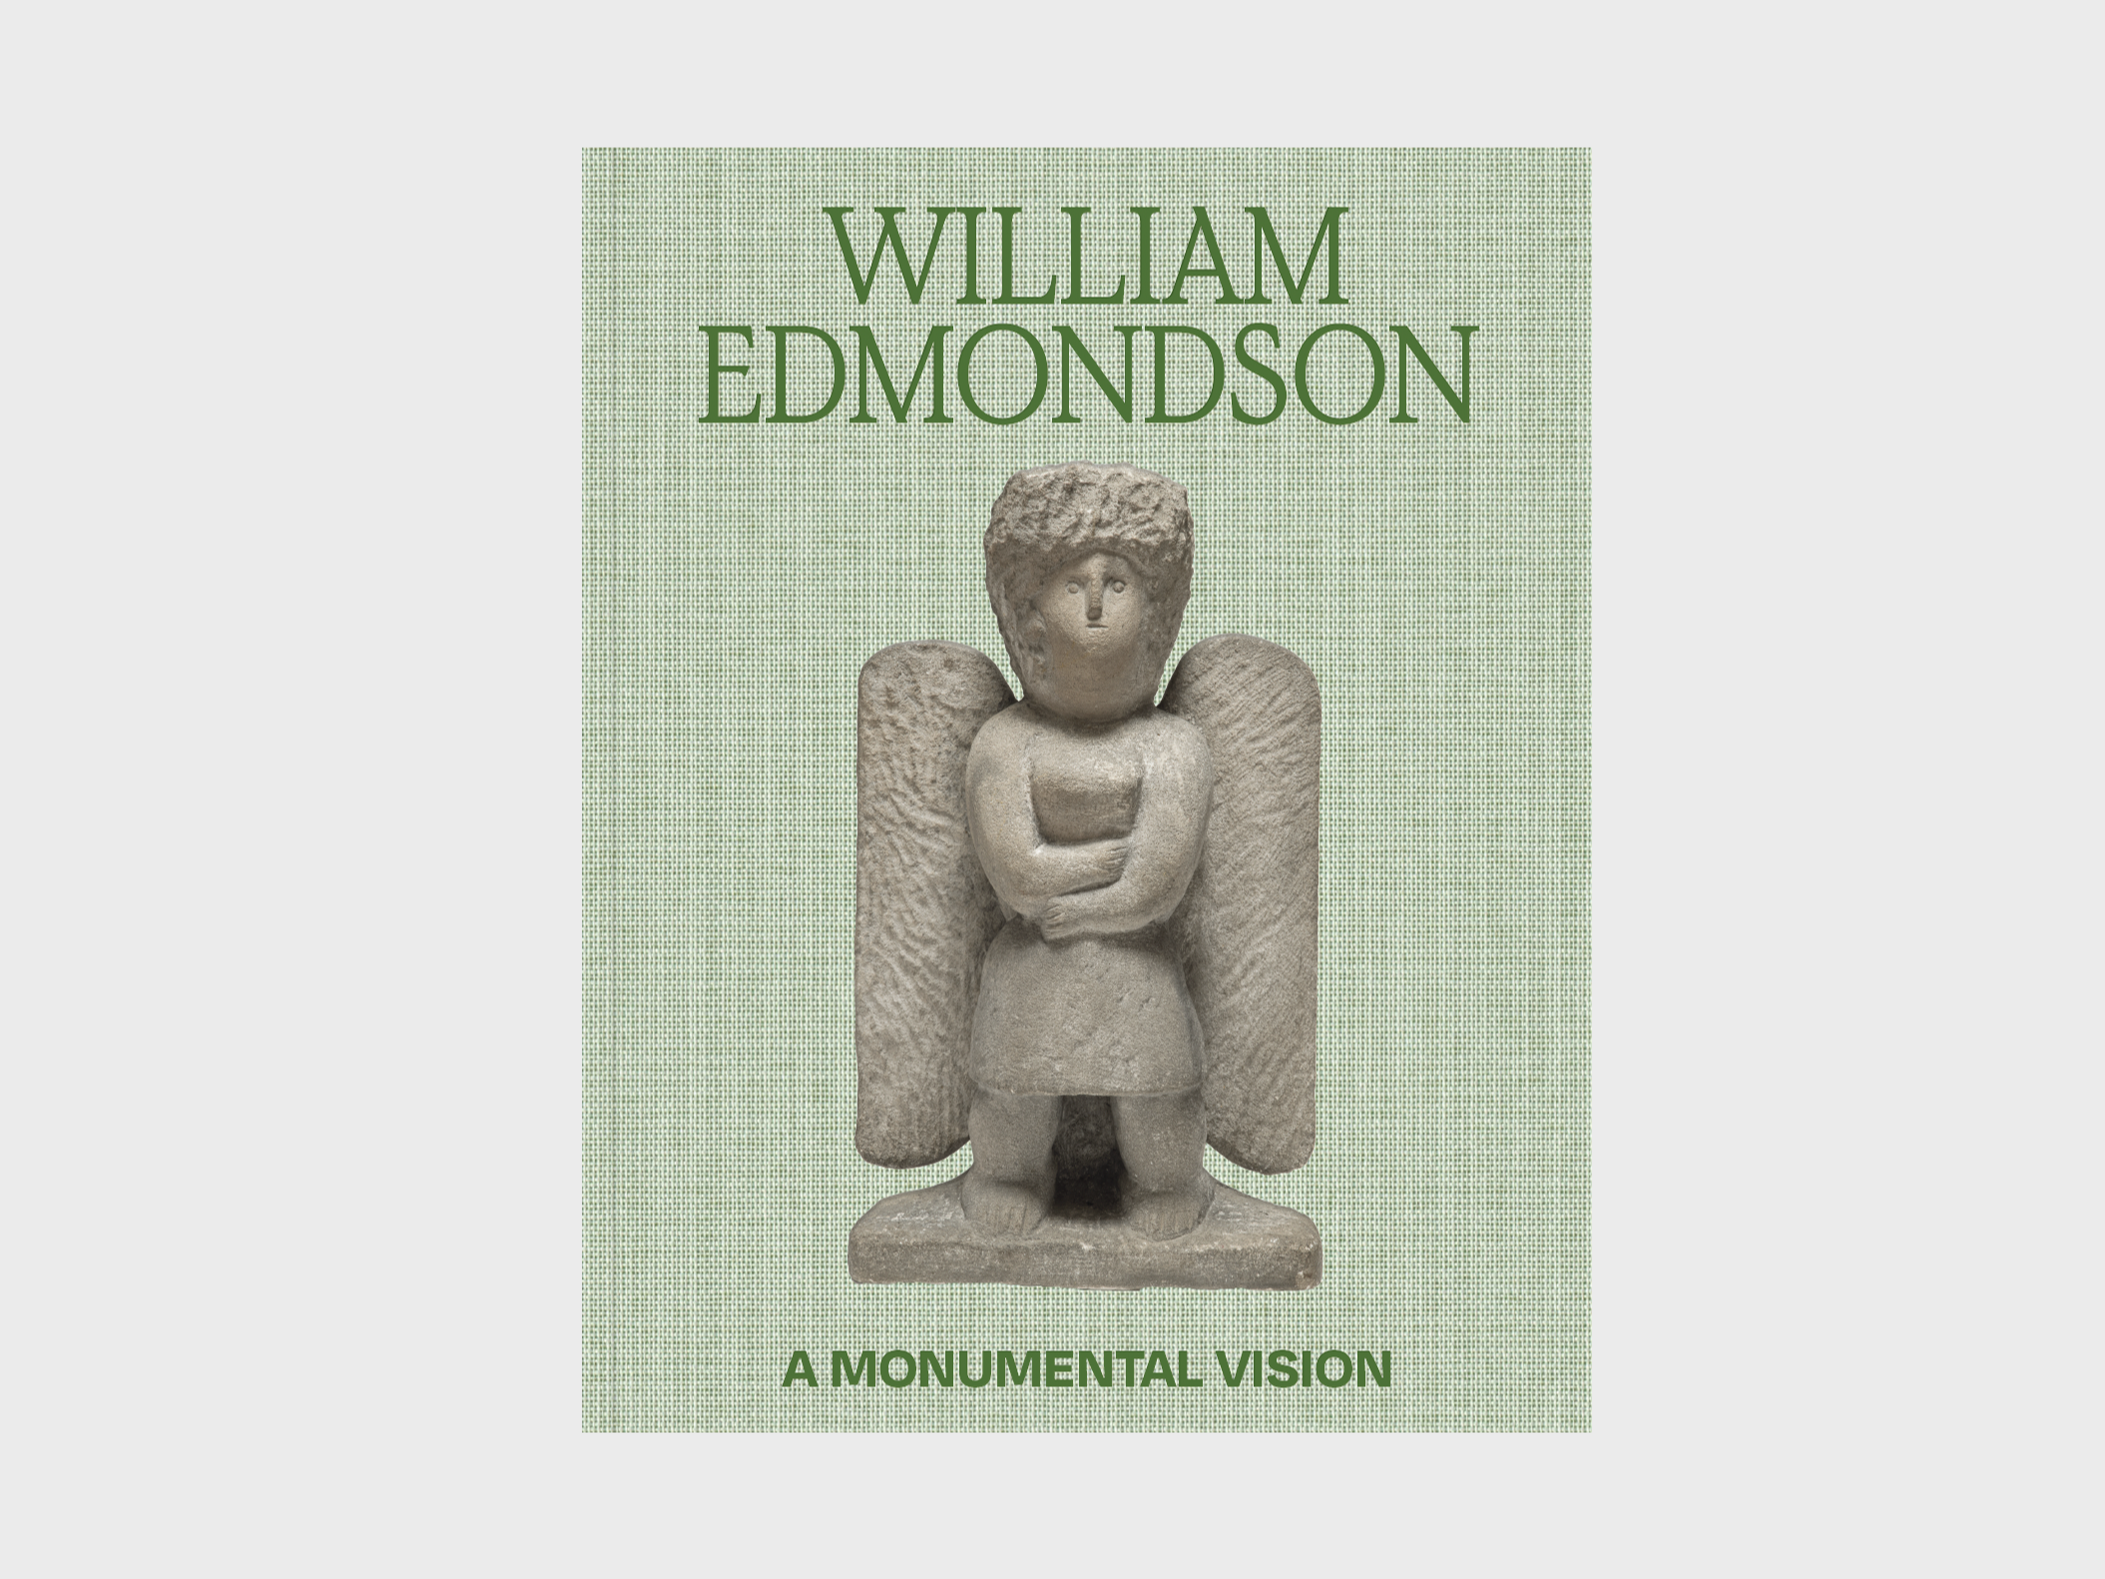 Light green book cover which features a carved stone angel in the center. Above and below the angel are the artist's name and book title. 